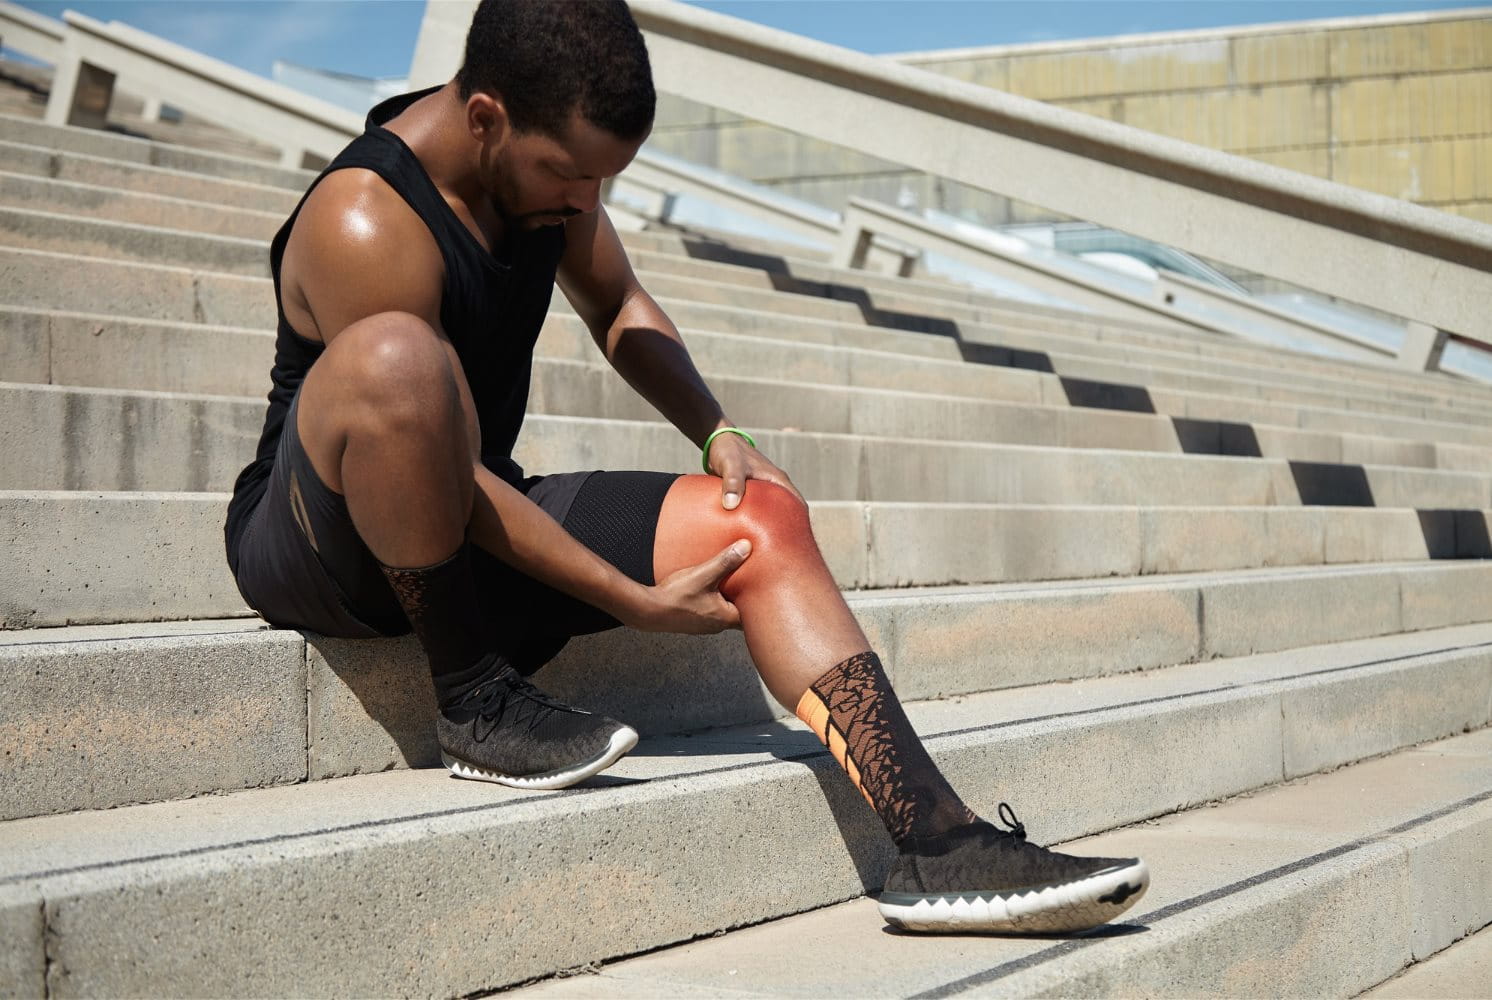 Experiencing Joint Pain as an Athlete? Here's What You Should Do